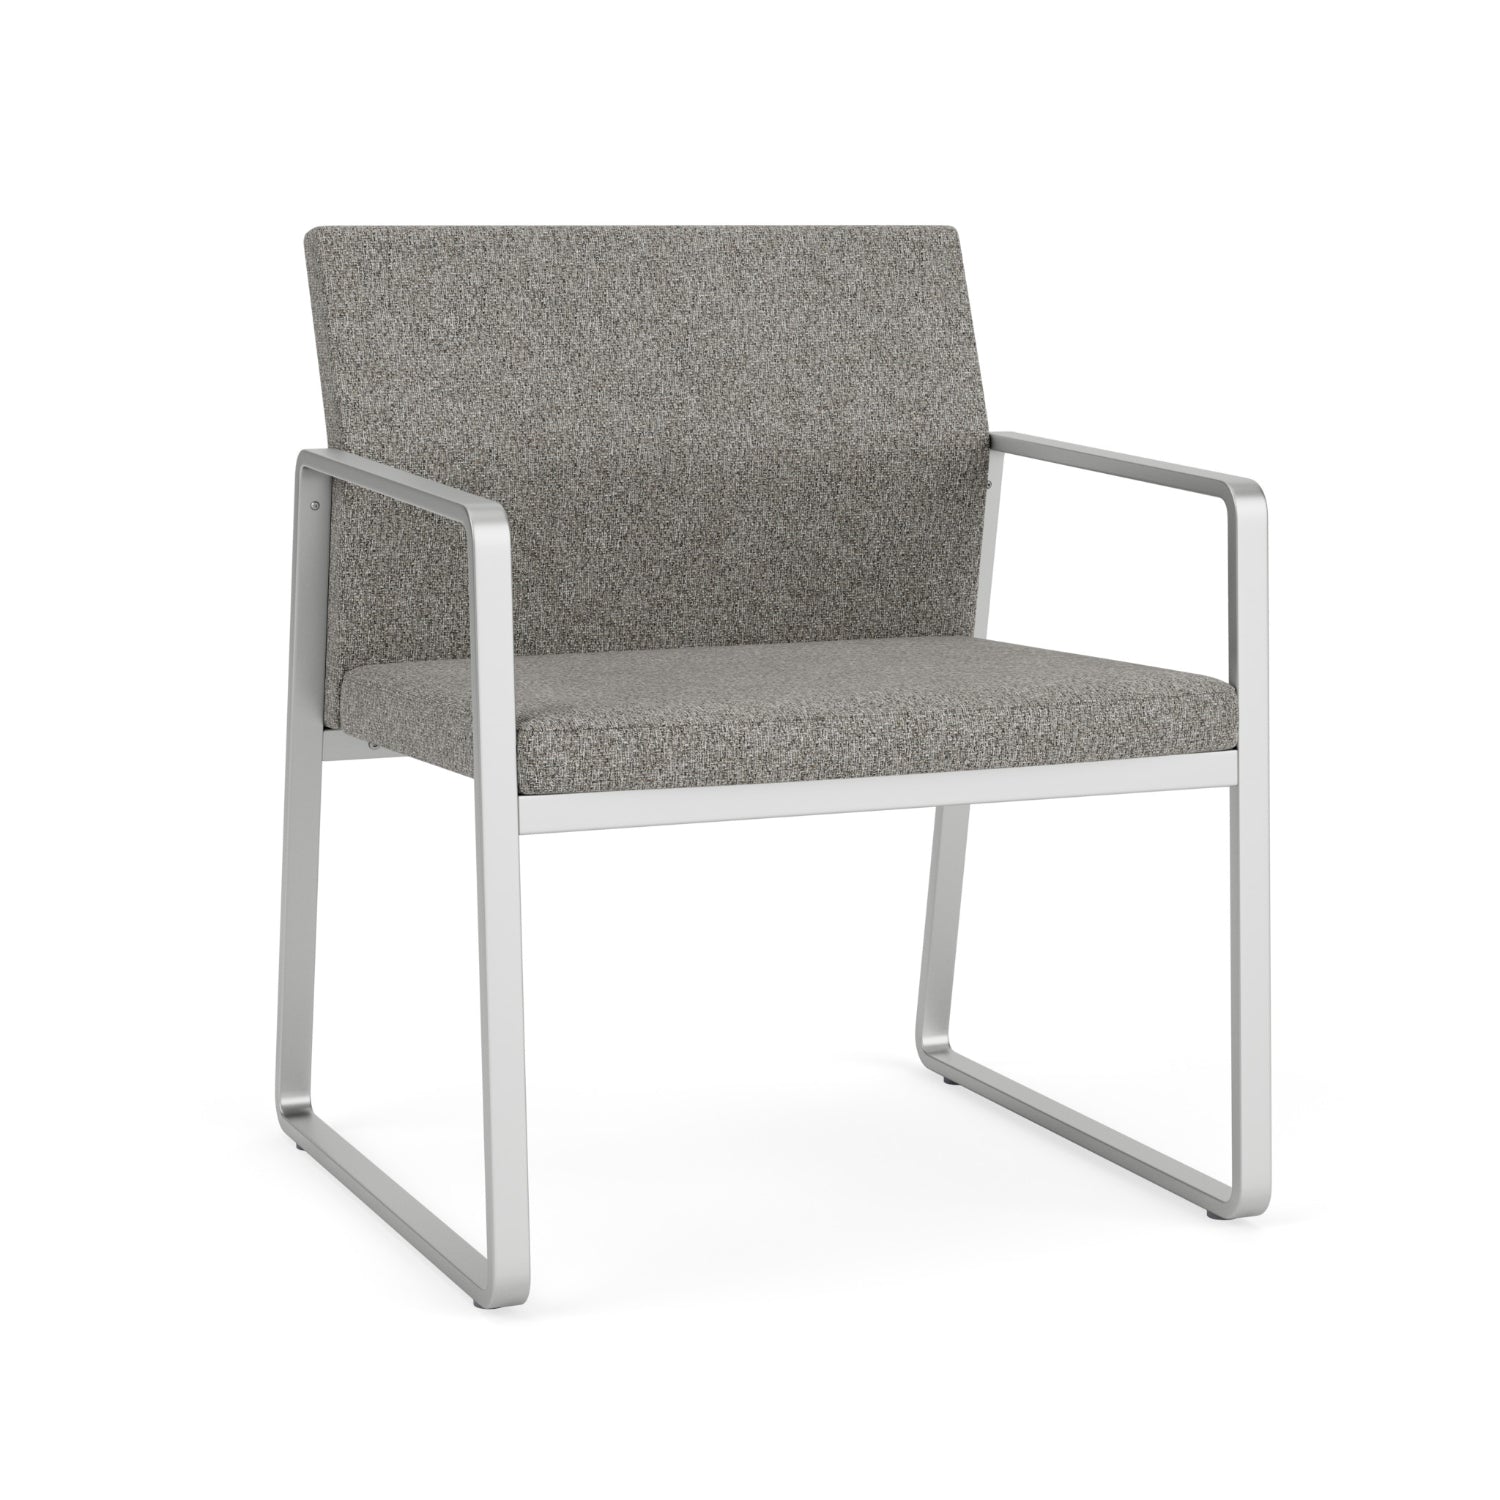 Gansett Collection Reception Seating, Oversize Guest Chair, 400 lb. Capacity, Standard Fabric Upholstery, FREE SHIPPING